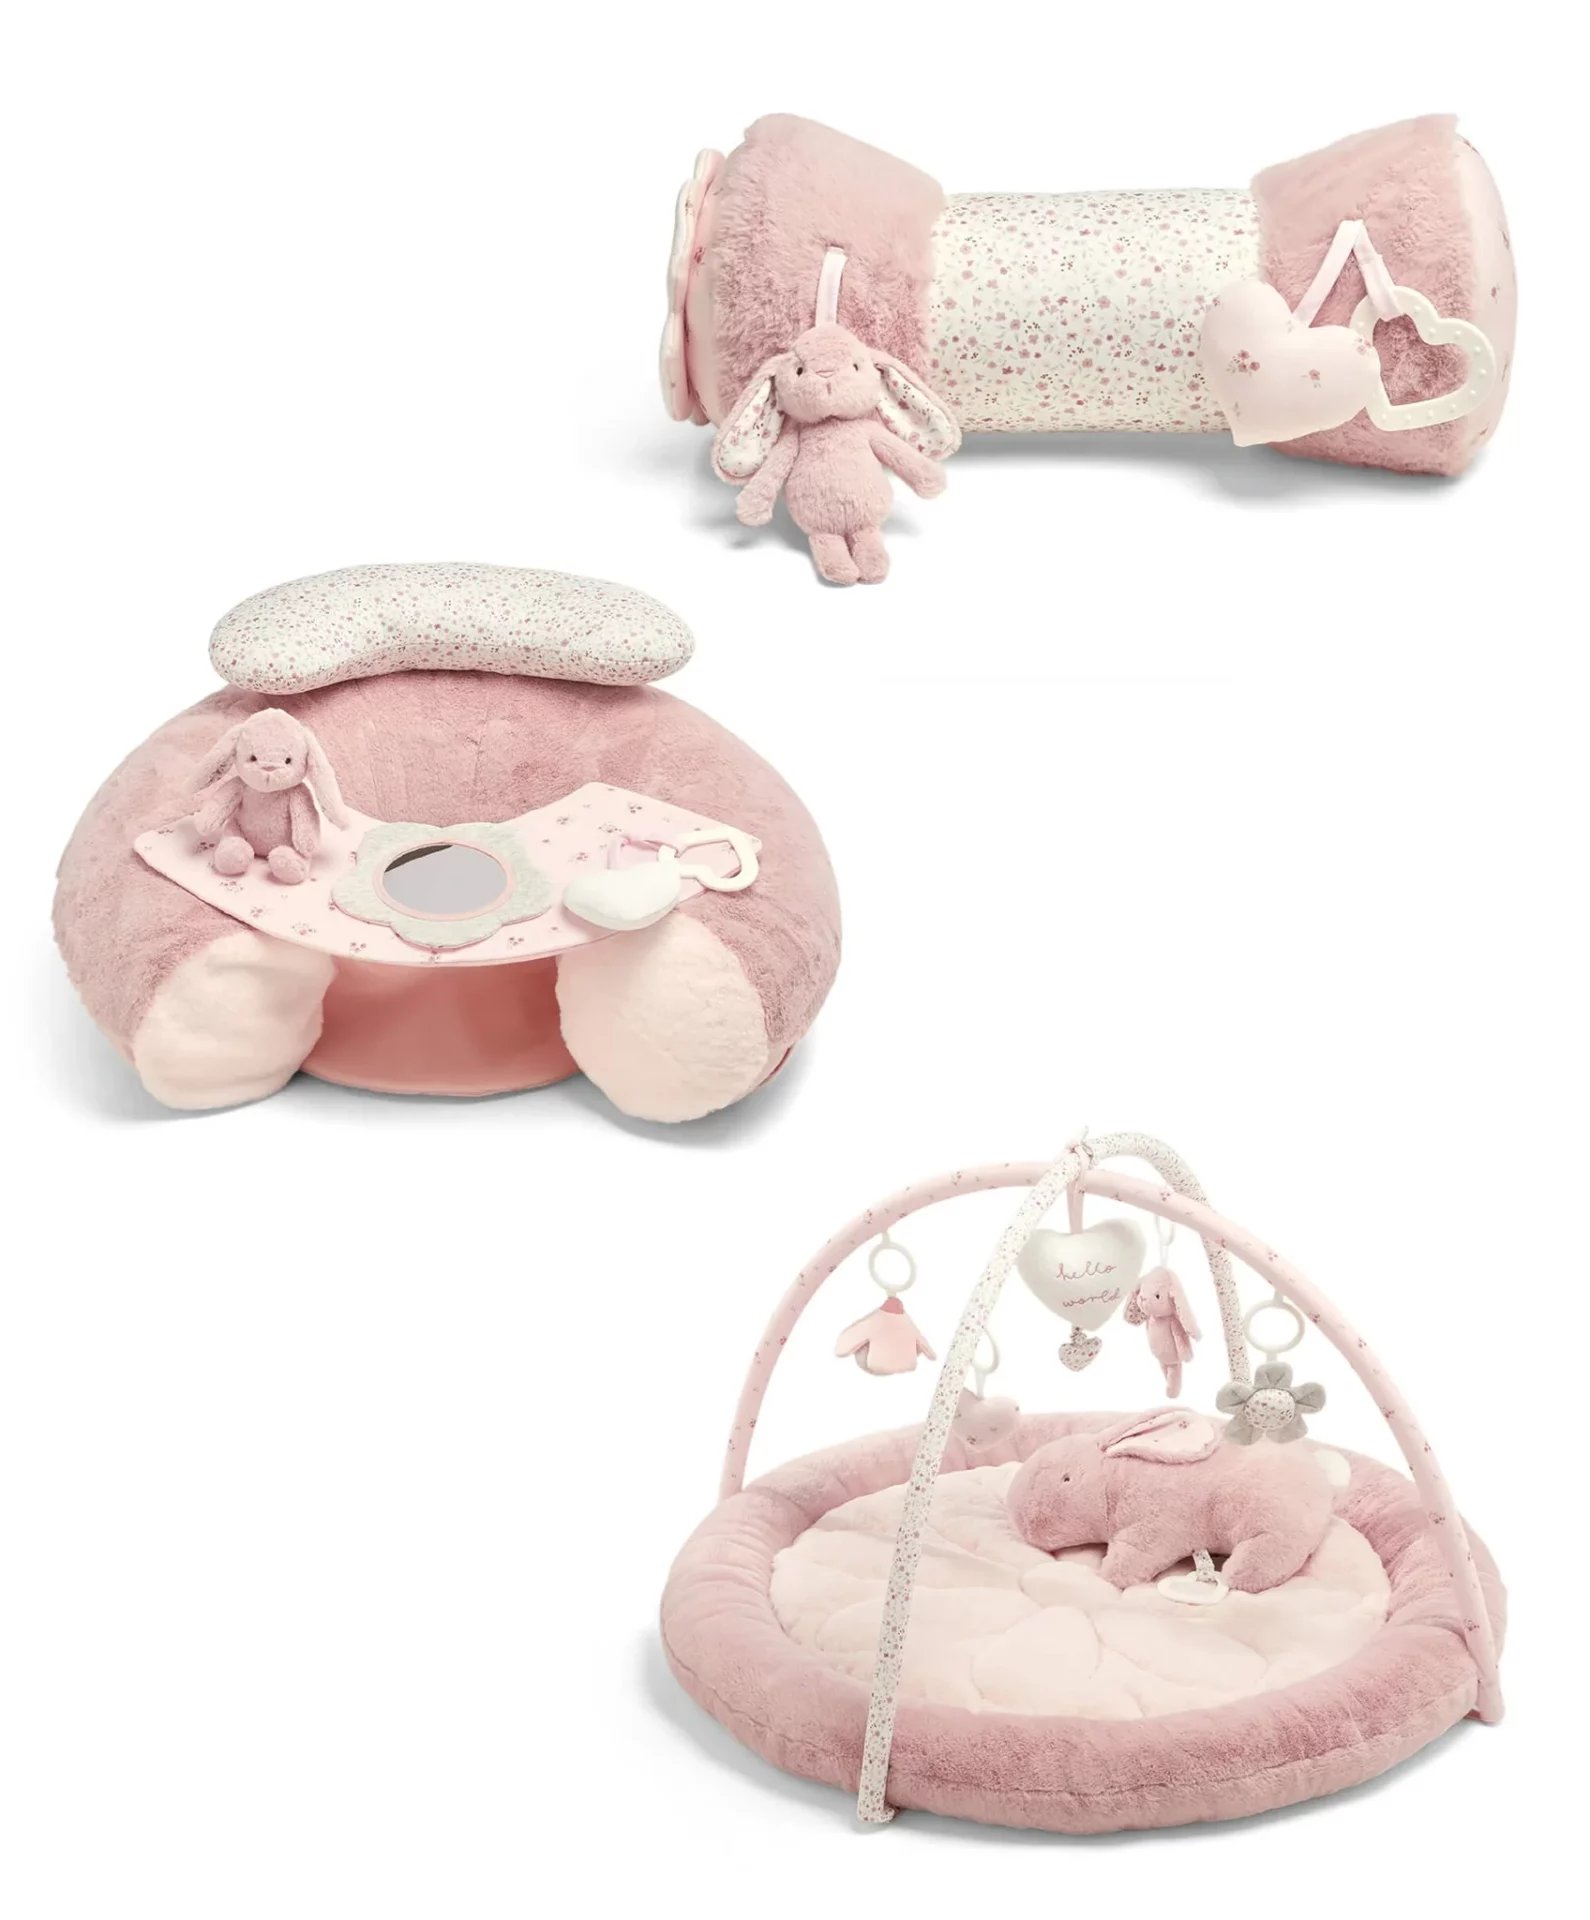 Mamas & Papas Welcome To The World – Pink Playgym, Tummy Time